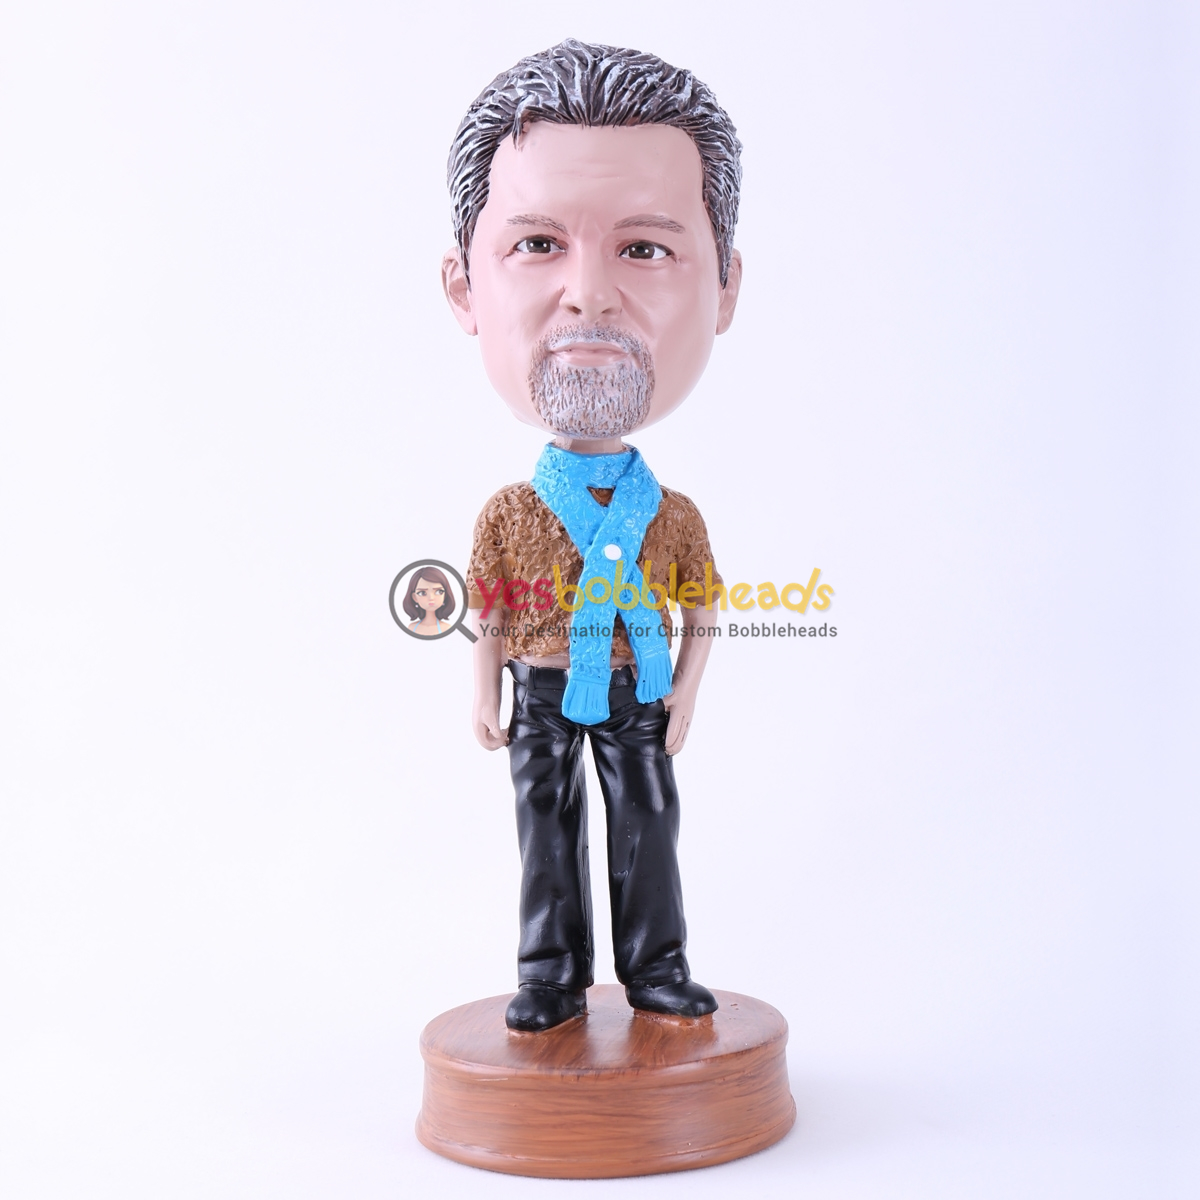 Picture of Custom Bobblehead Doll: Man with Blue Scarf